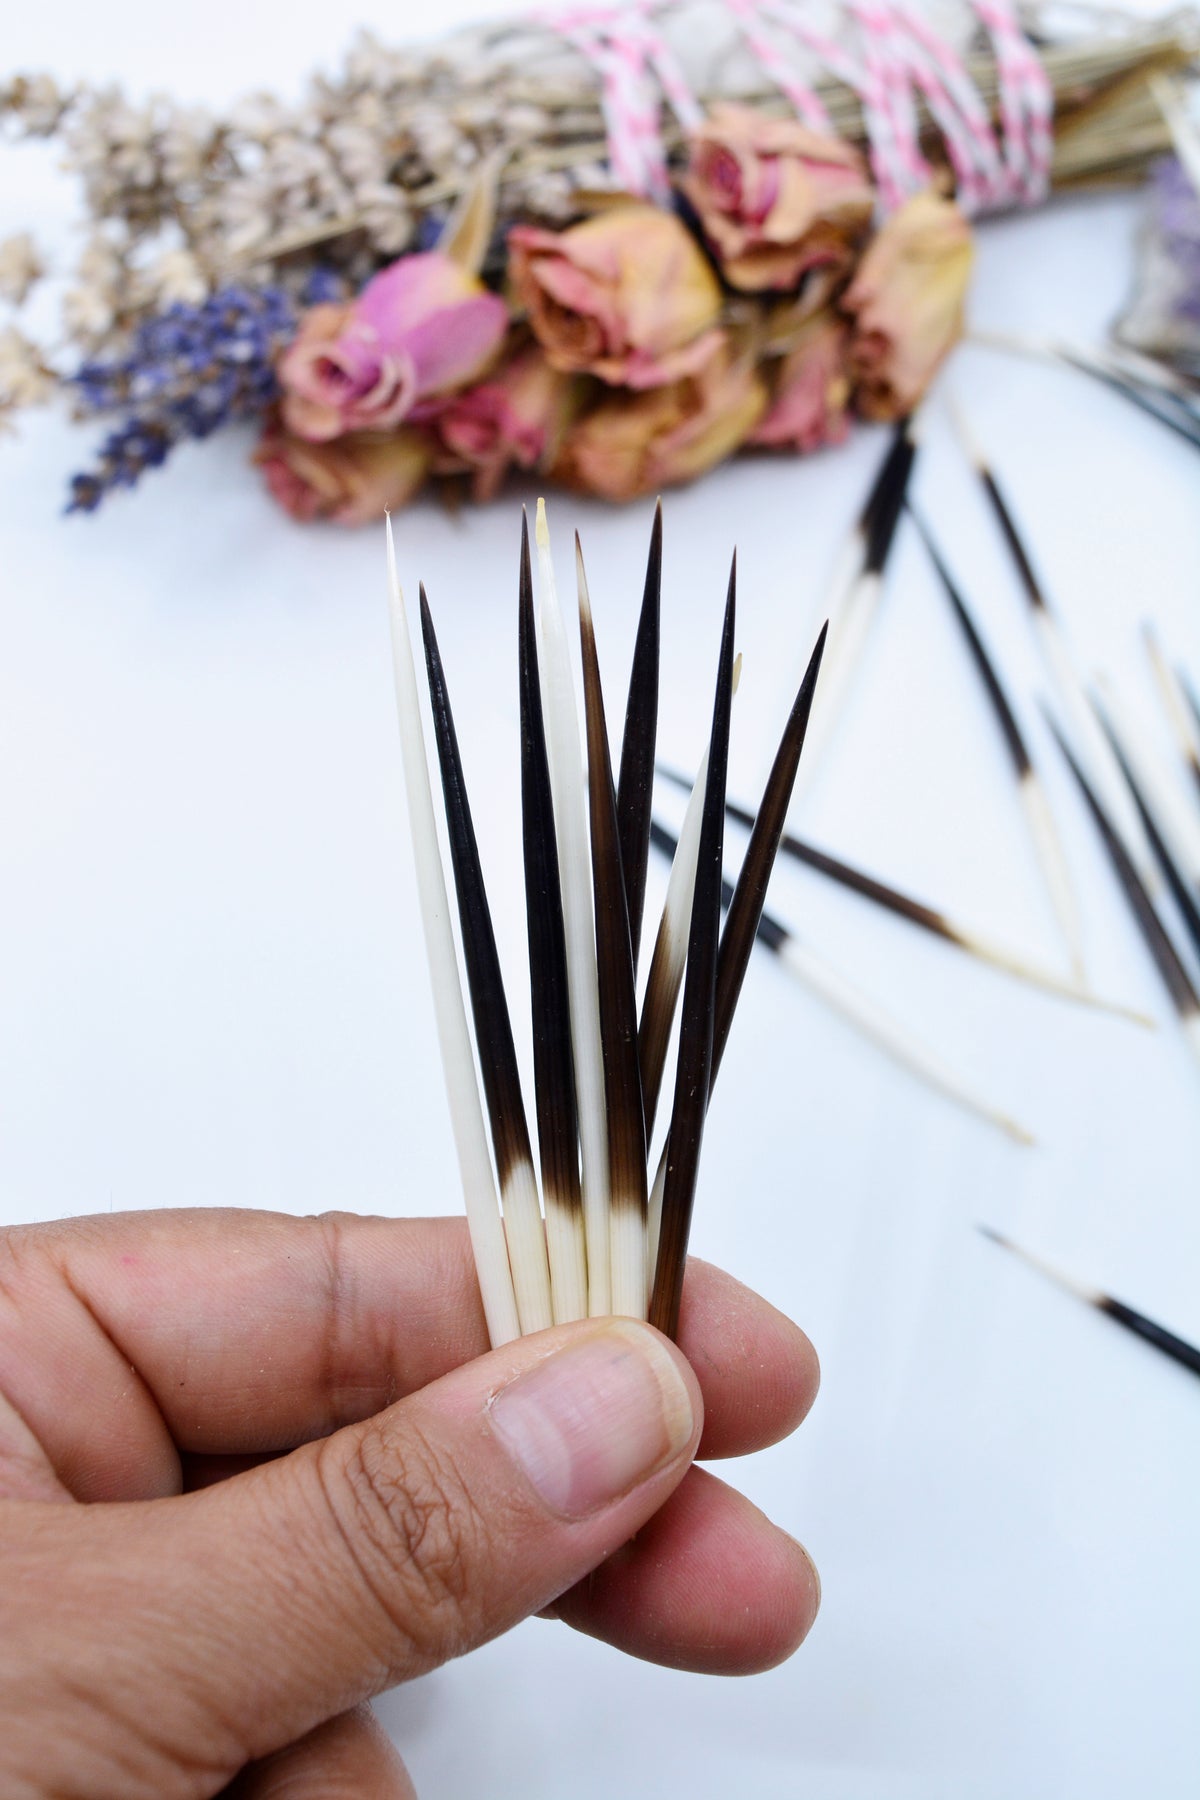 Porcupine Quill 46 African Porcupine Quills Needles Spines Craft & Decor  Crafts Nautical Beach DIY 